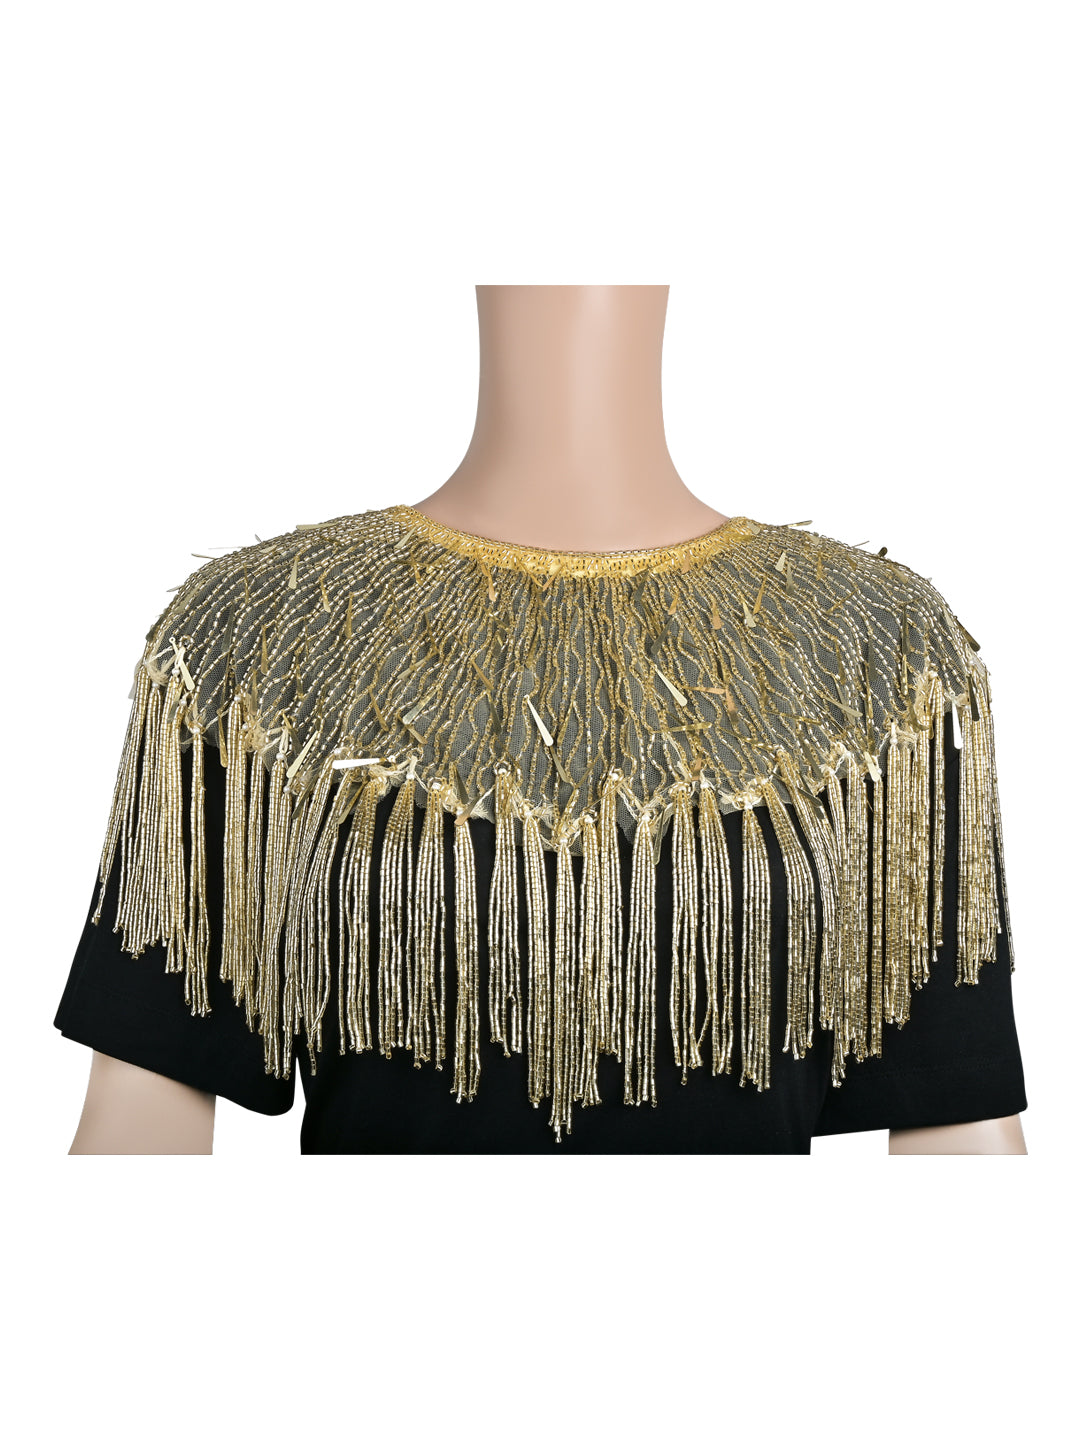 Whether you're attending a glamorous soirée or seeking to make a statement at a cultural event, this cape is sure to elevate any ensemble with its unparalleled elegance.